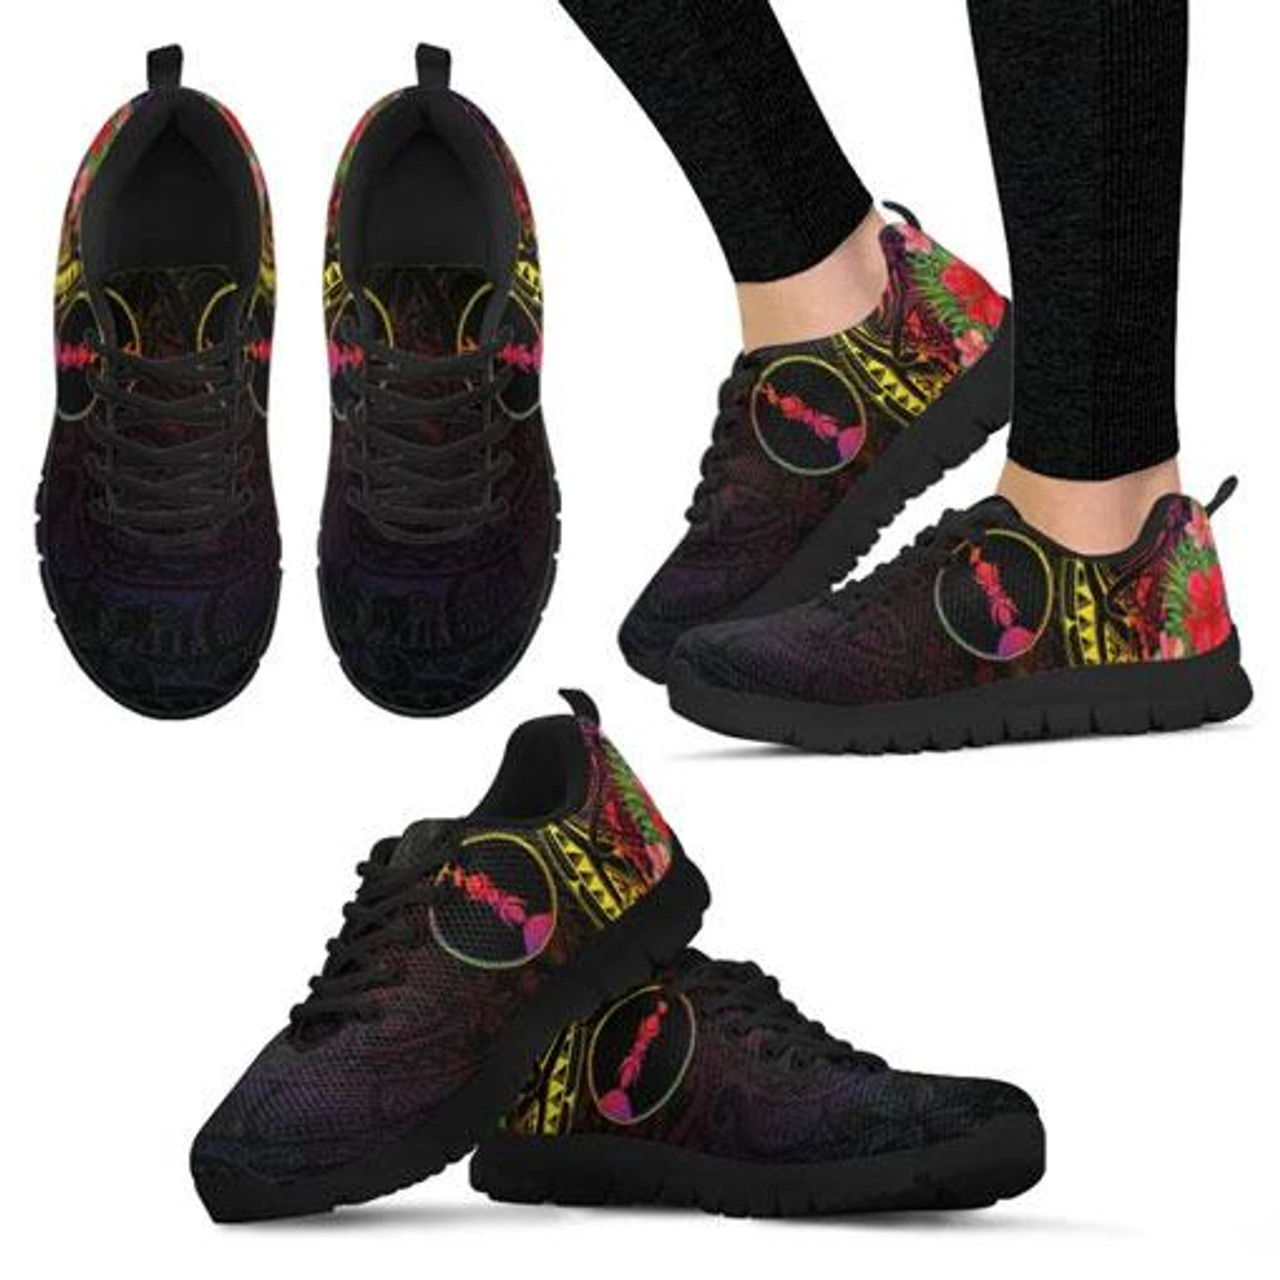 New Caledonia Sneakers - Tropical Hippie Style 4